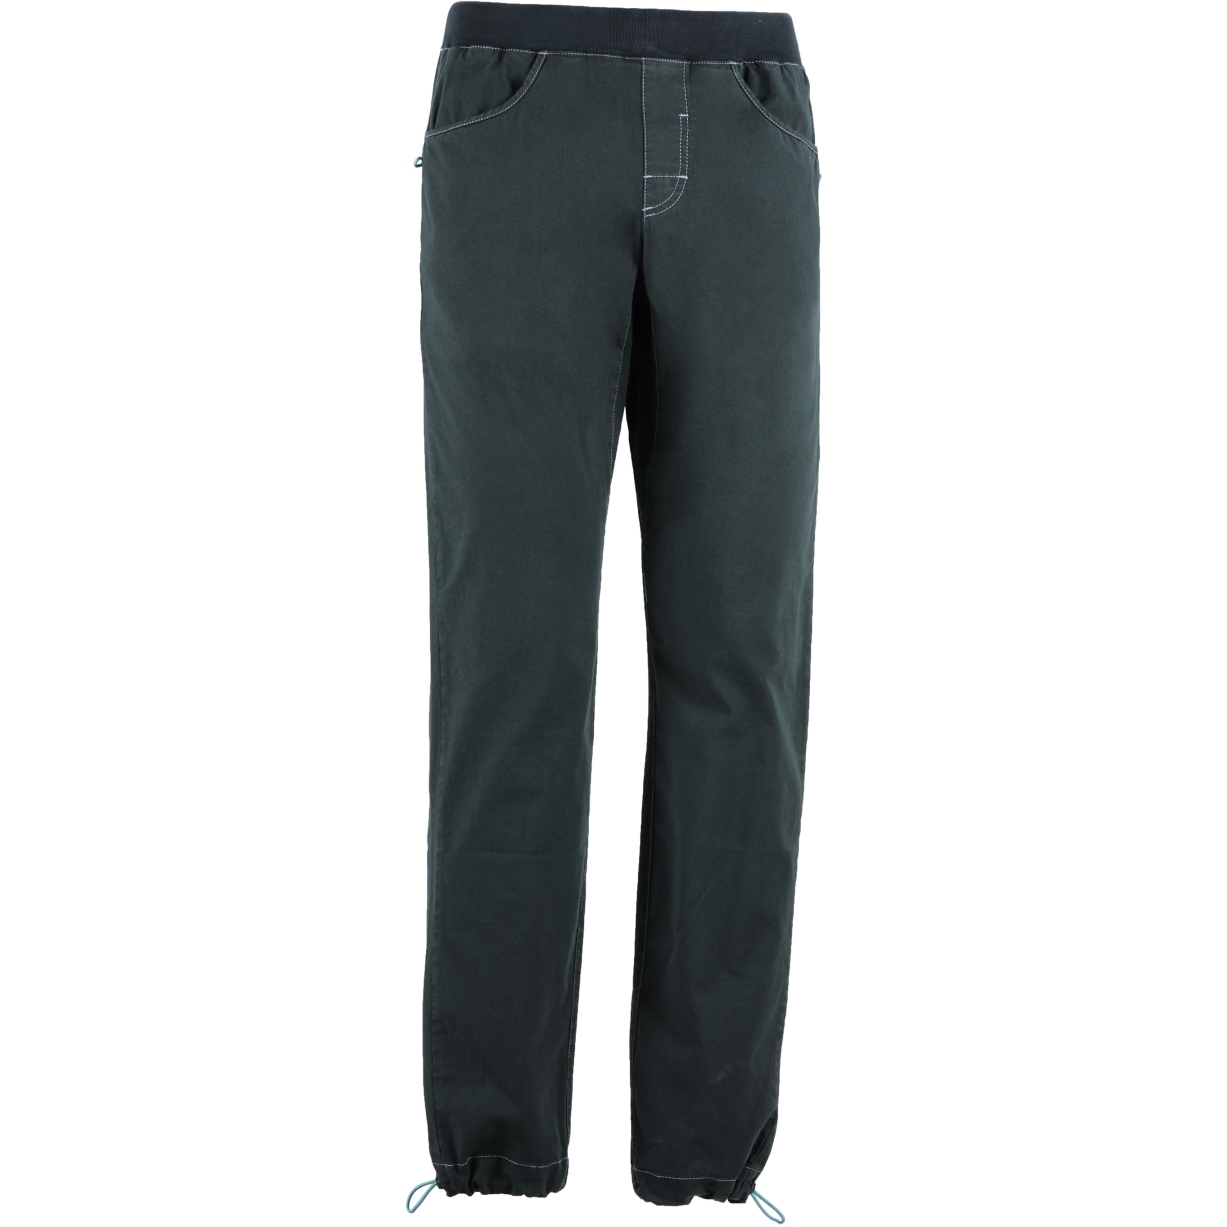 Picture of E9 Teo2.3 Climbing Pants Men - Sea Weed